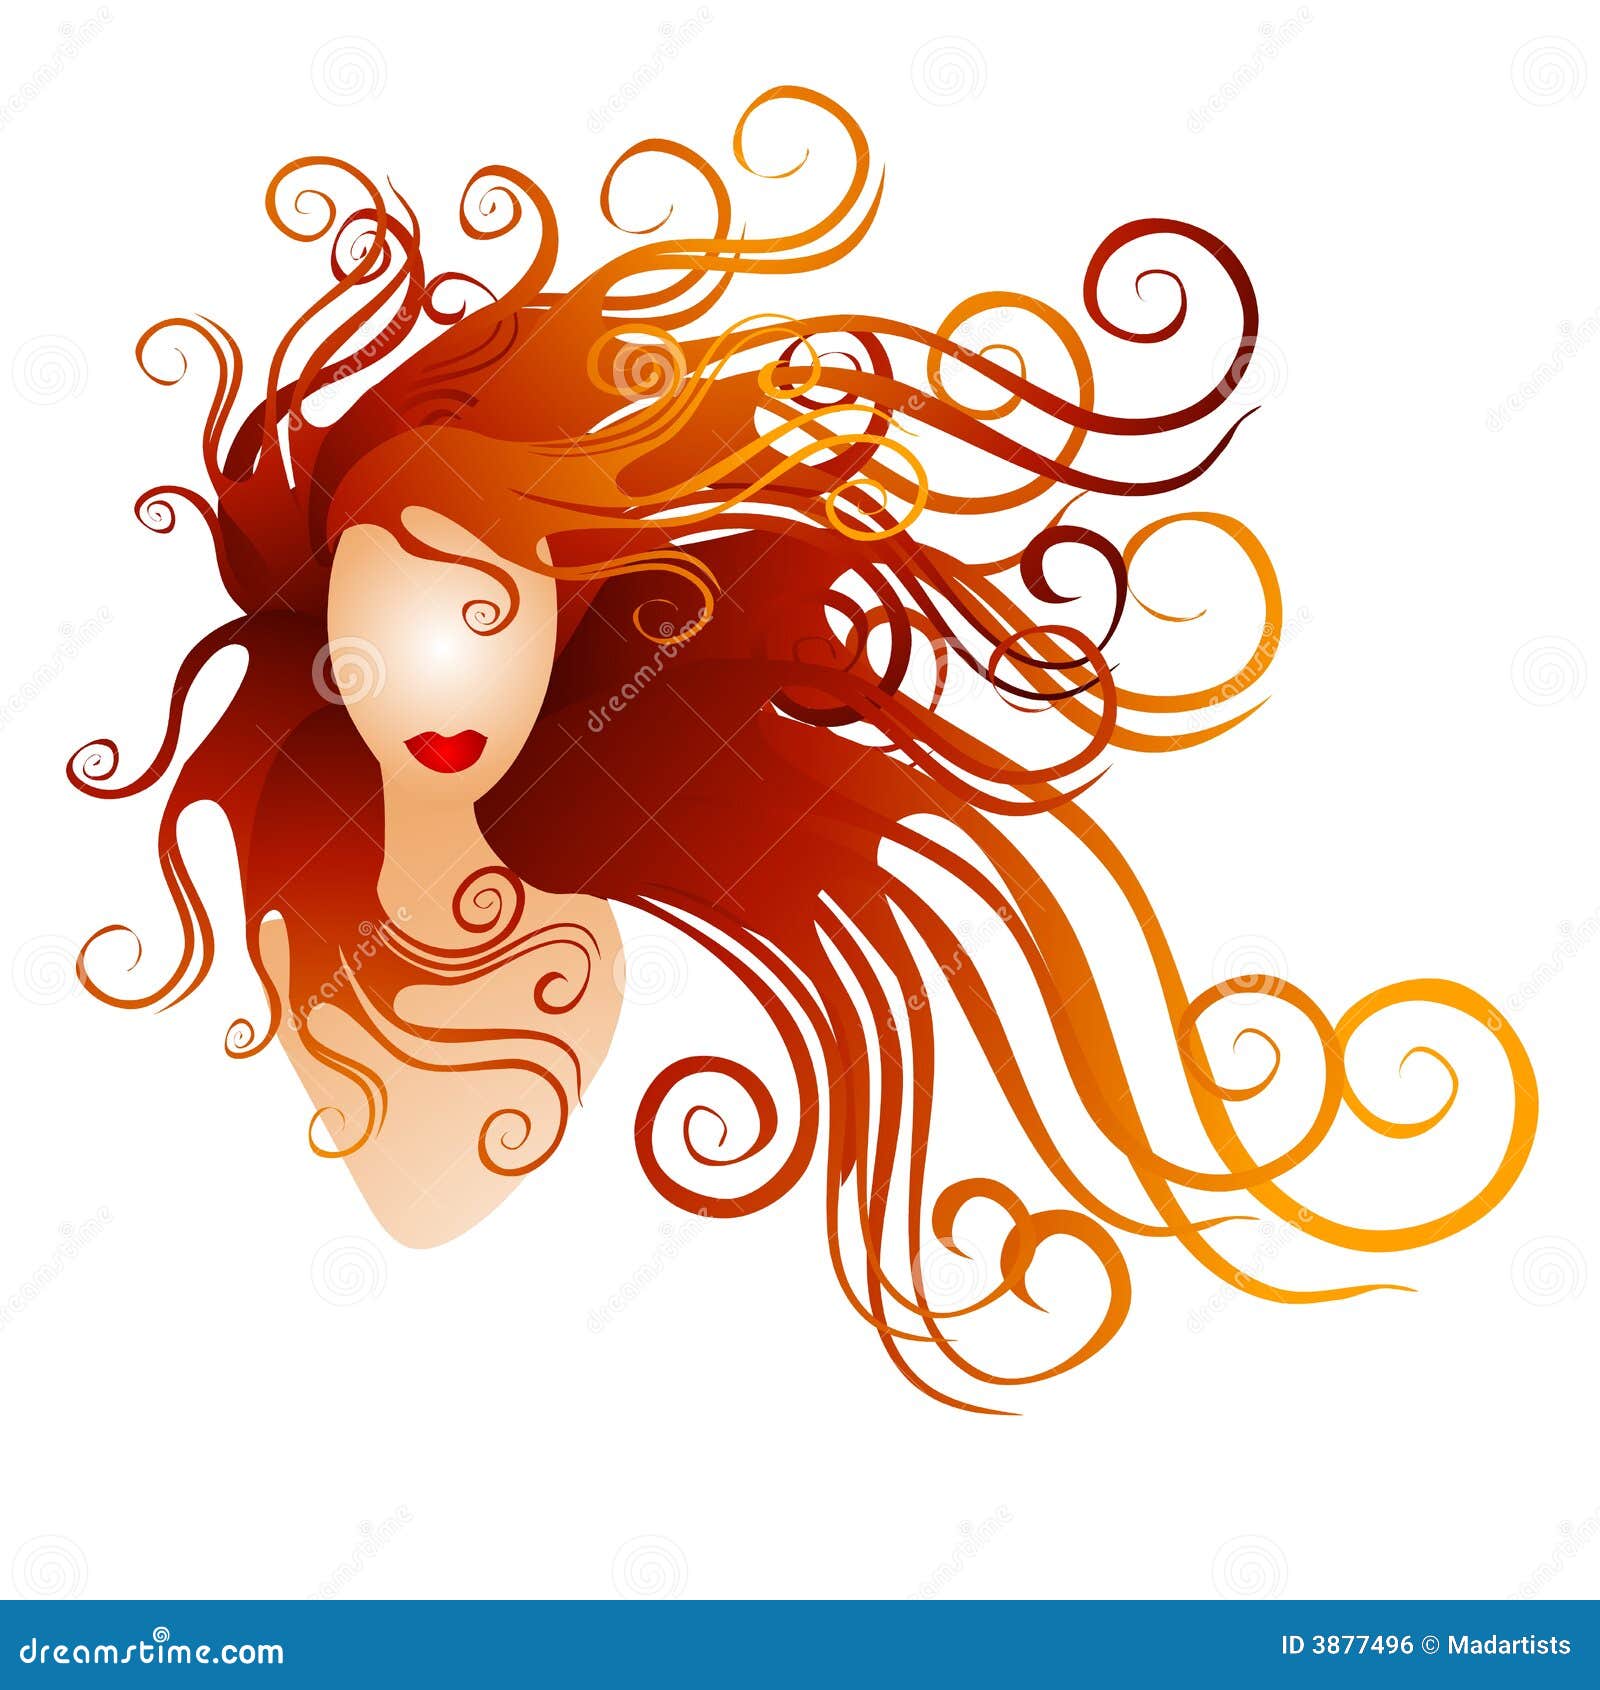 Woman With Long Red Flowing Hair Royalty Free Stock Image Image 3877496 